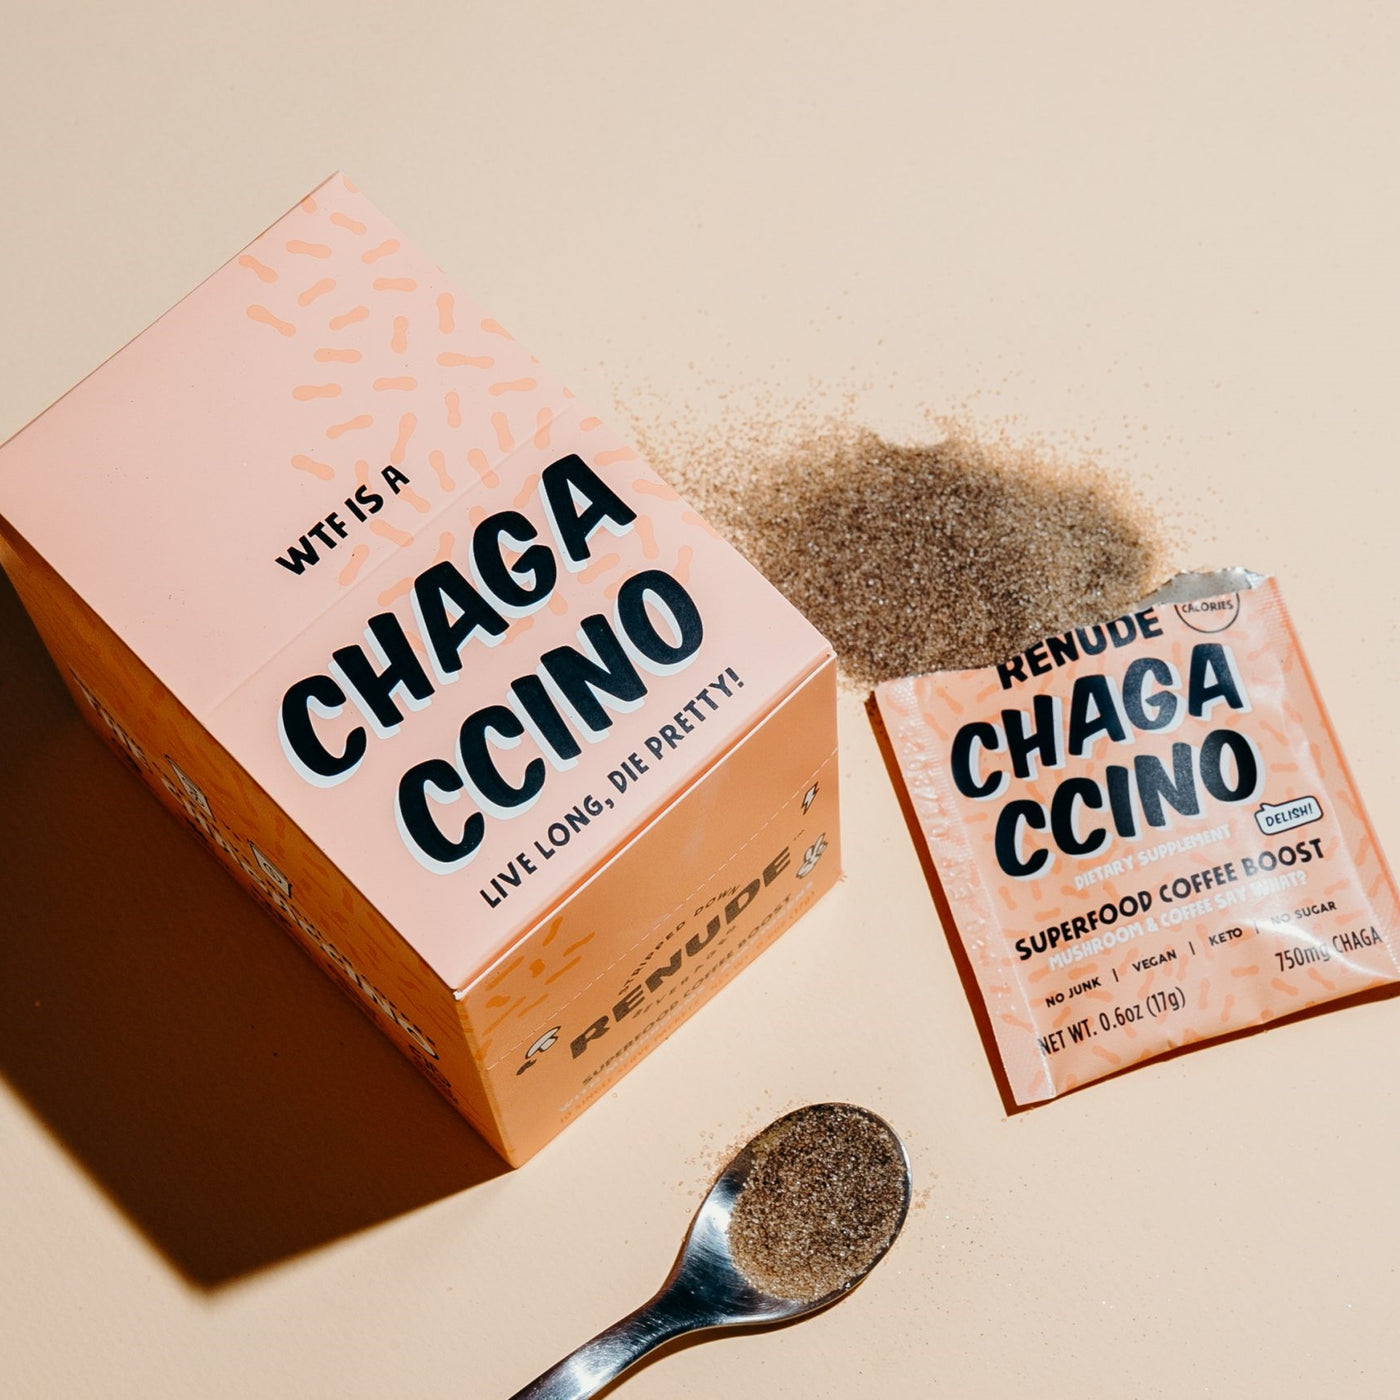 THE KETO DIET AND CHAGA